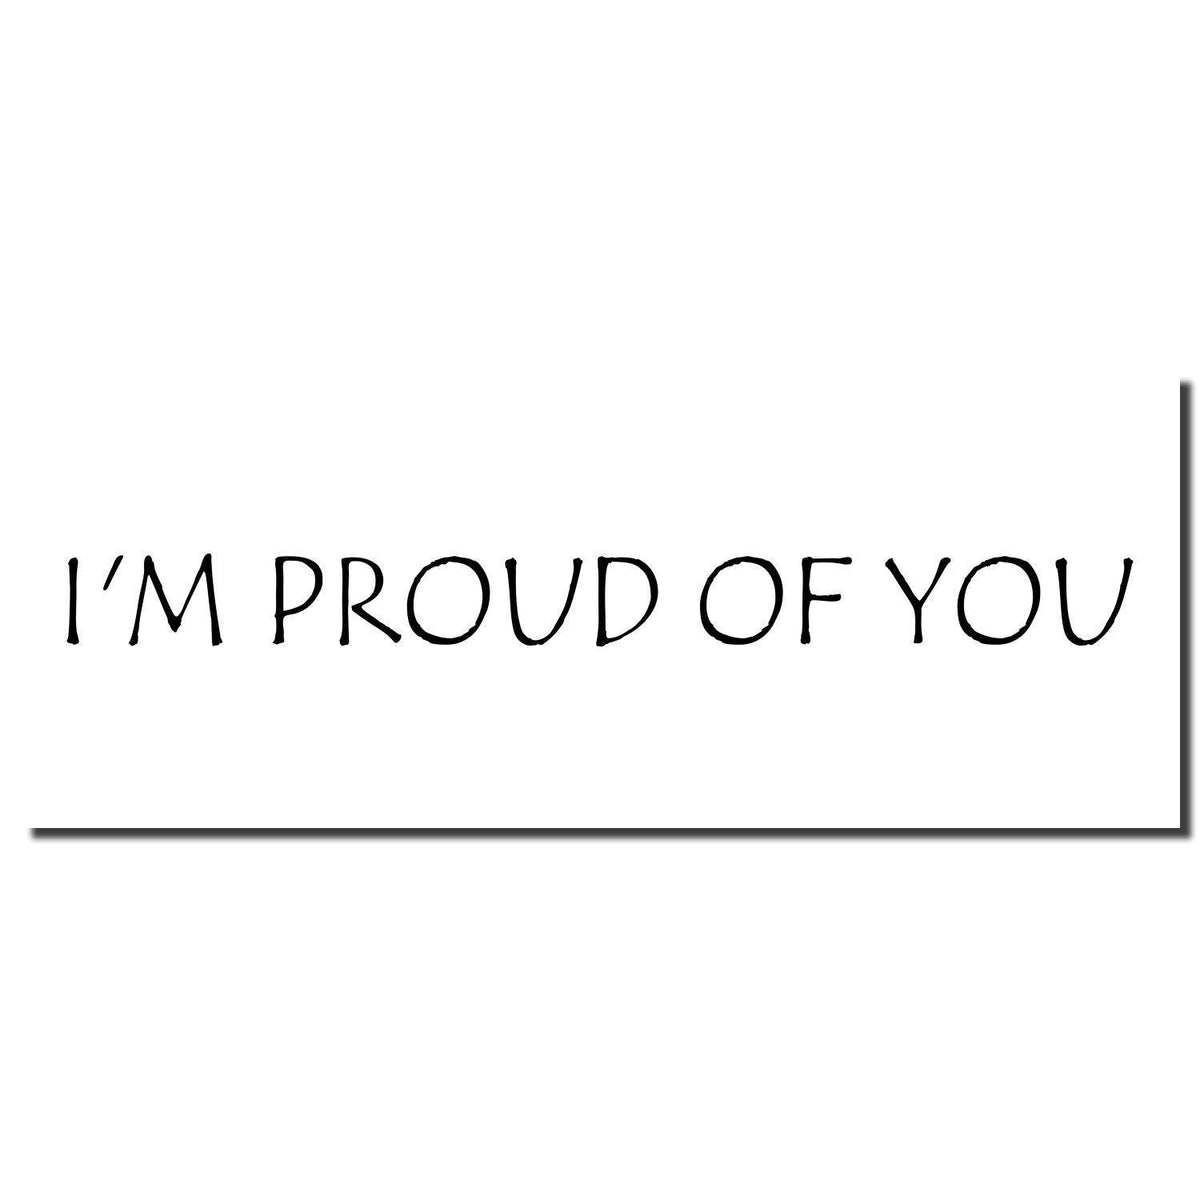 Enlarged Imprint Large Im Proud Of You Rubber Stamp Sample